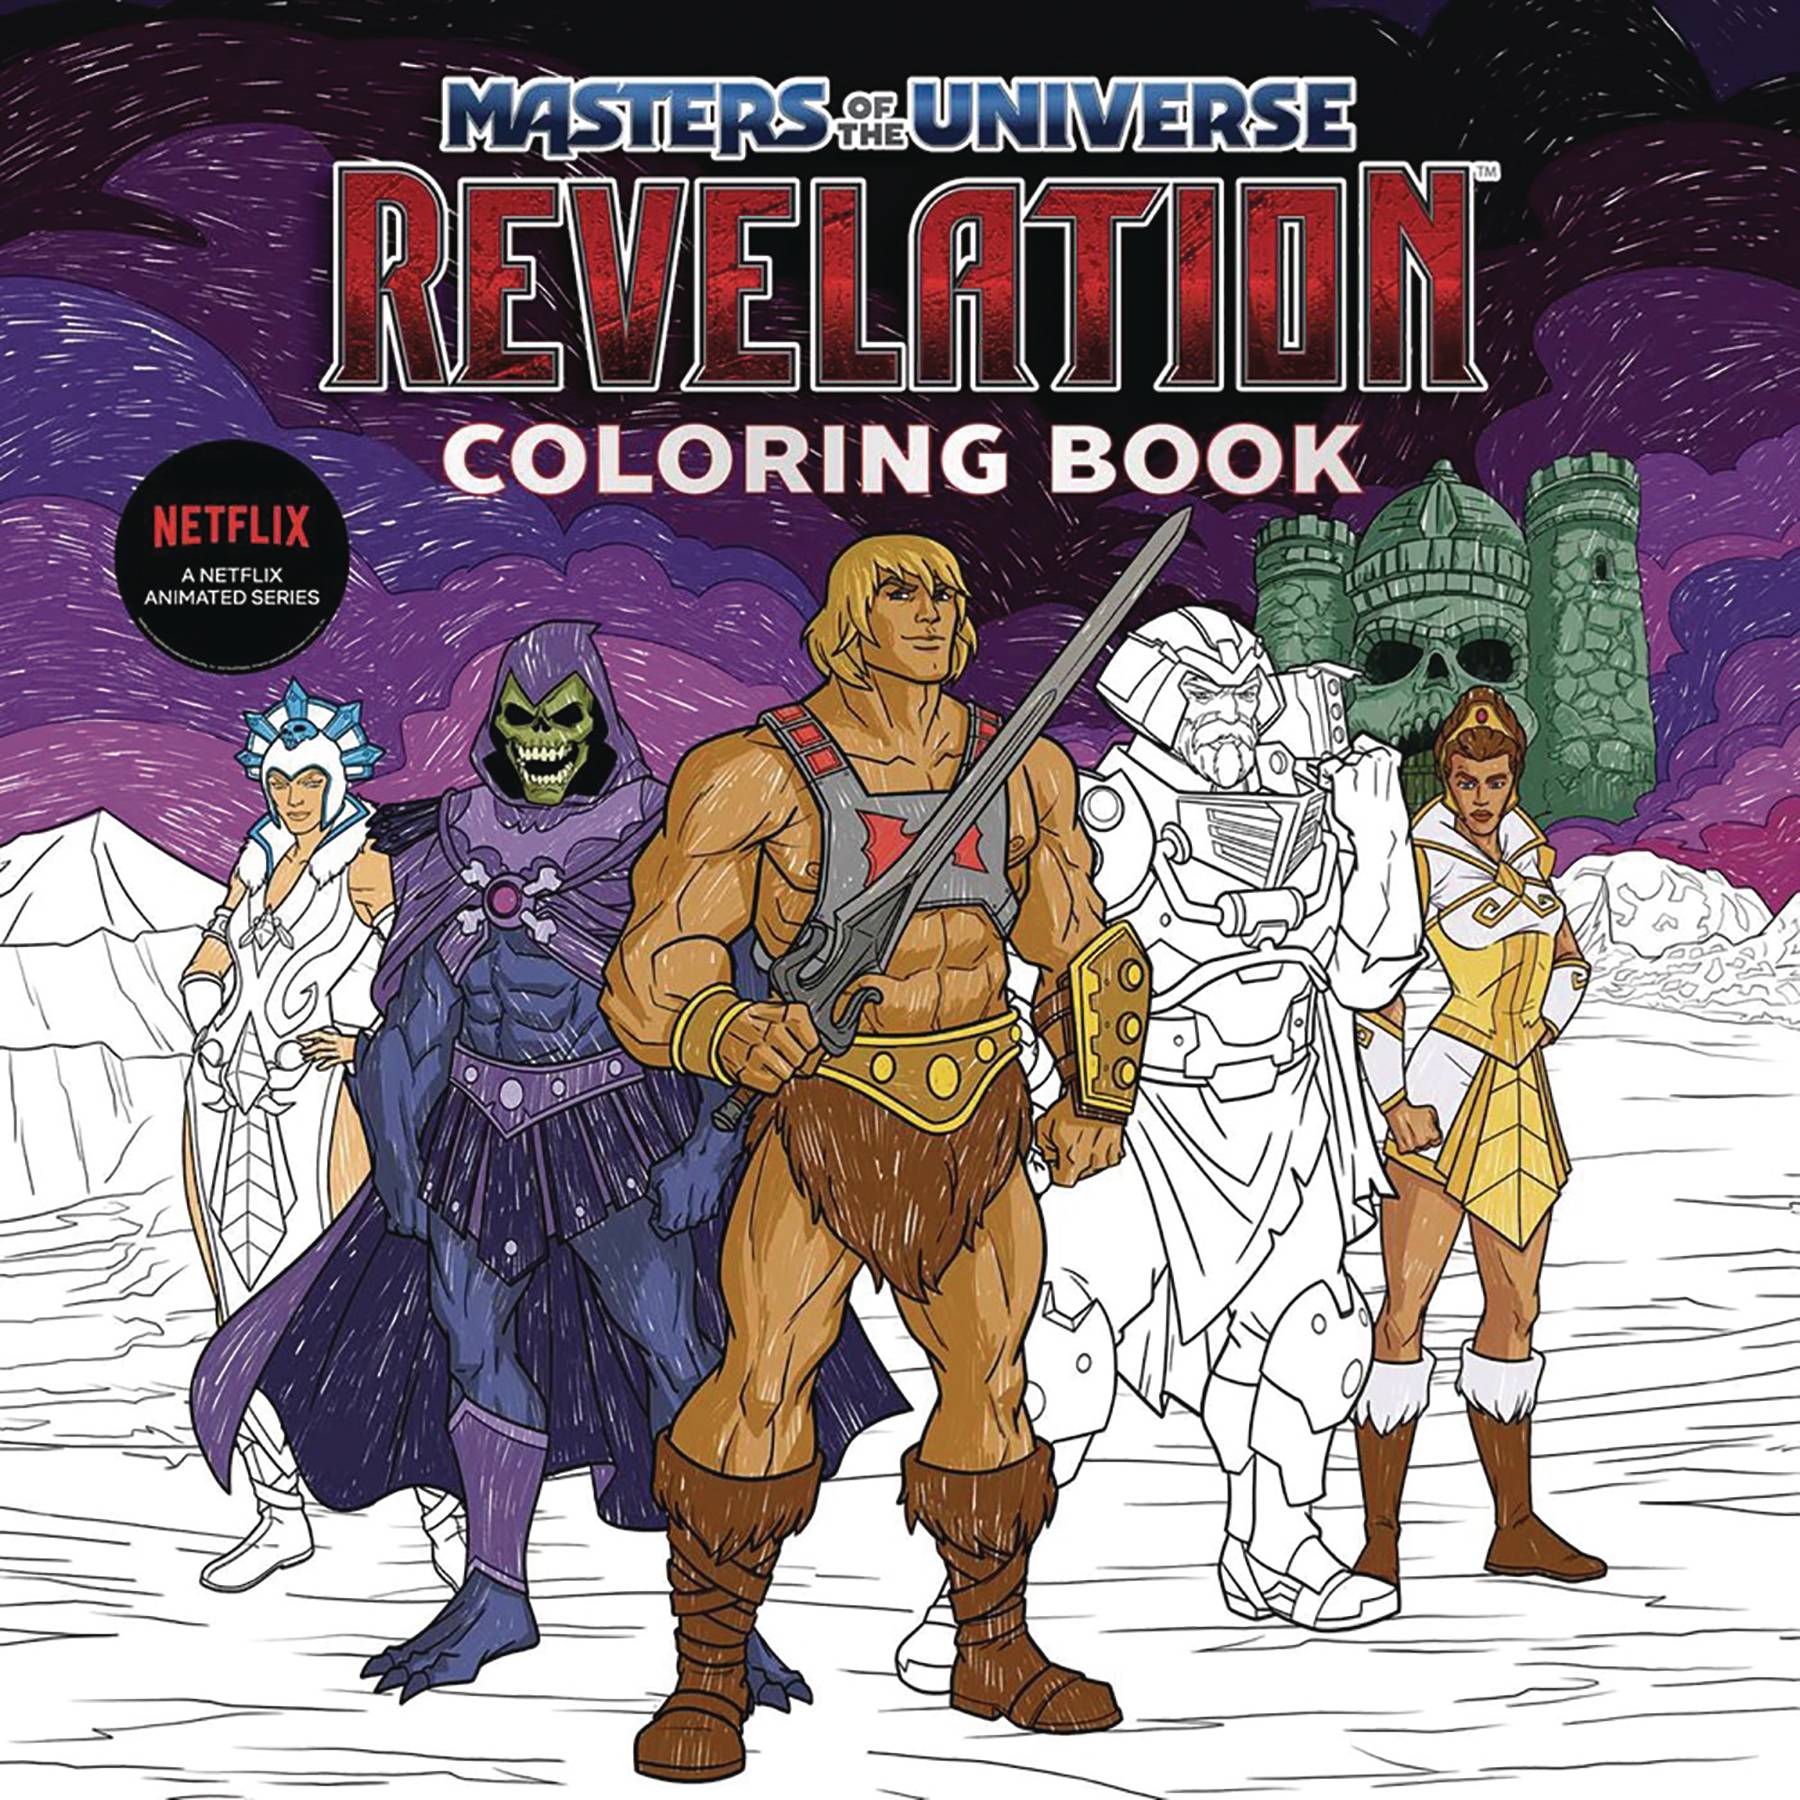 MASTERS OF THE UNIVERSE REVELATION OFF COLORING BOOK